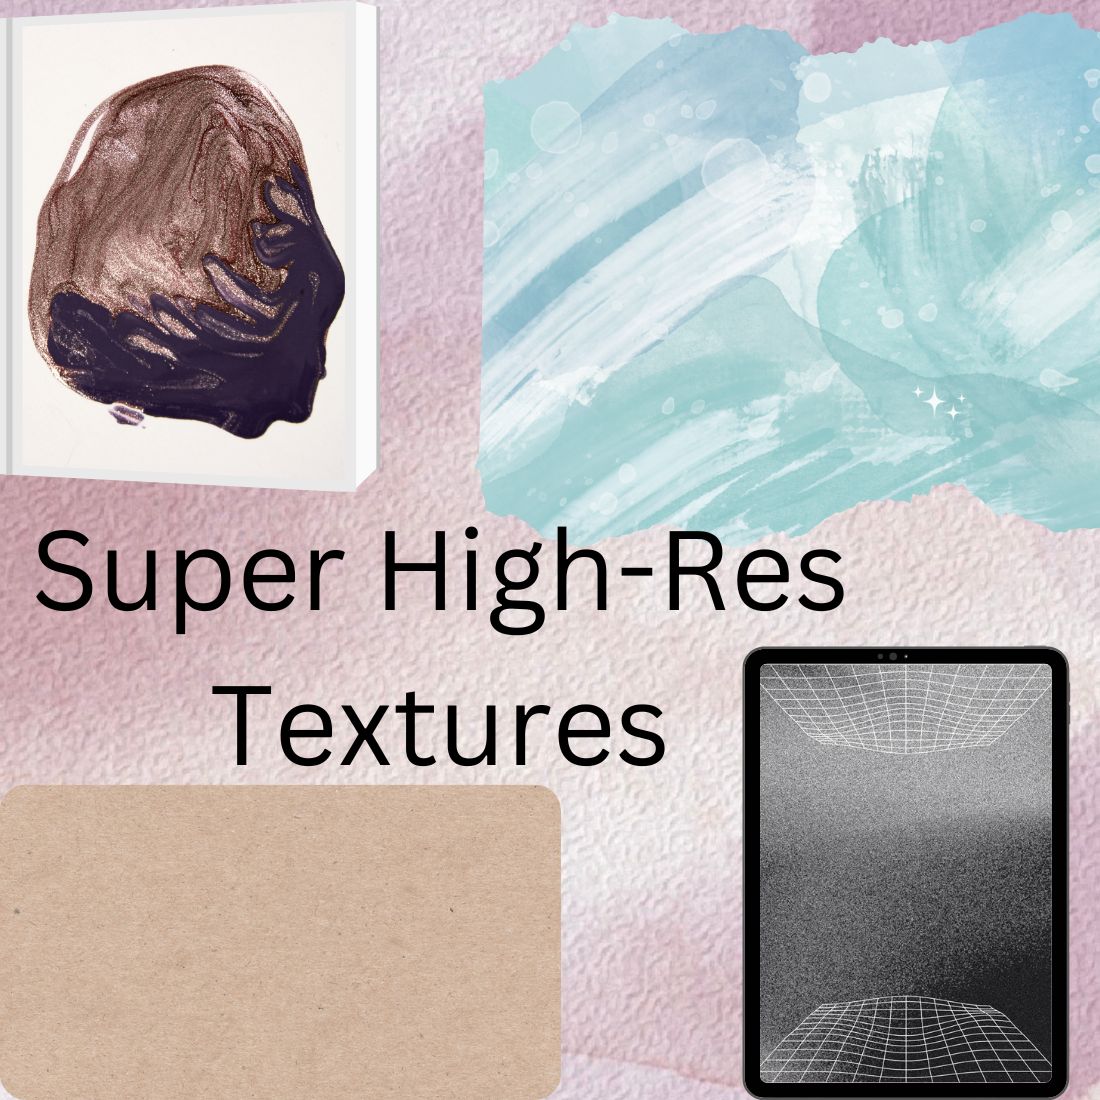 20+ Beautiful Textures Super High-Res - Only $5 facebook image.